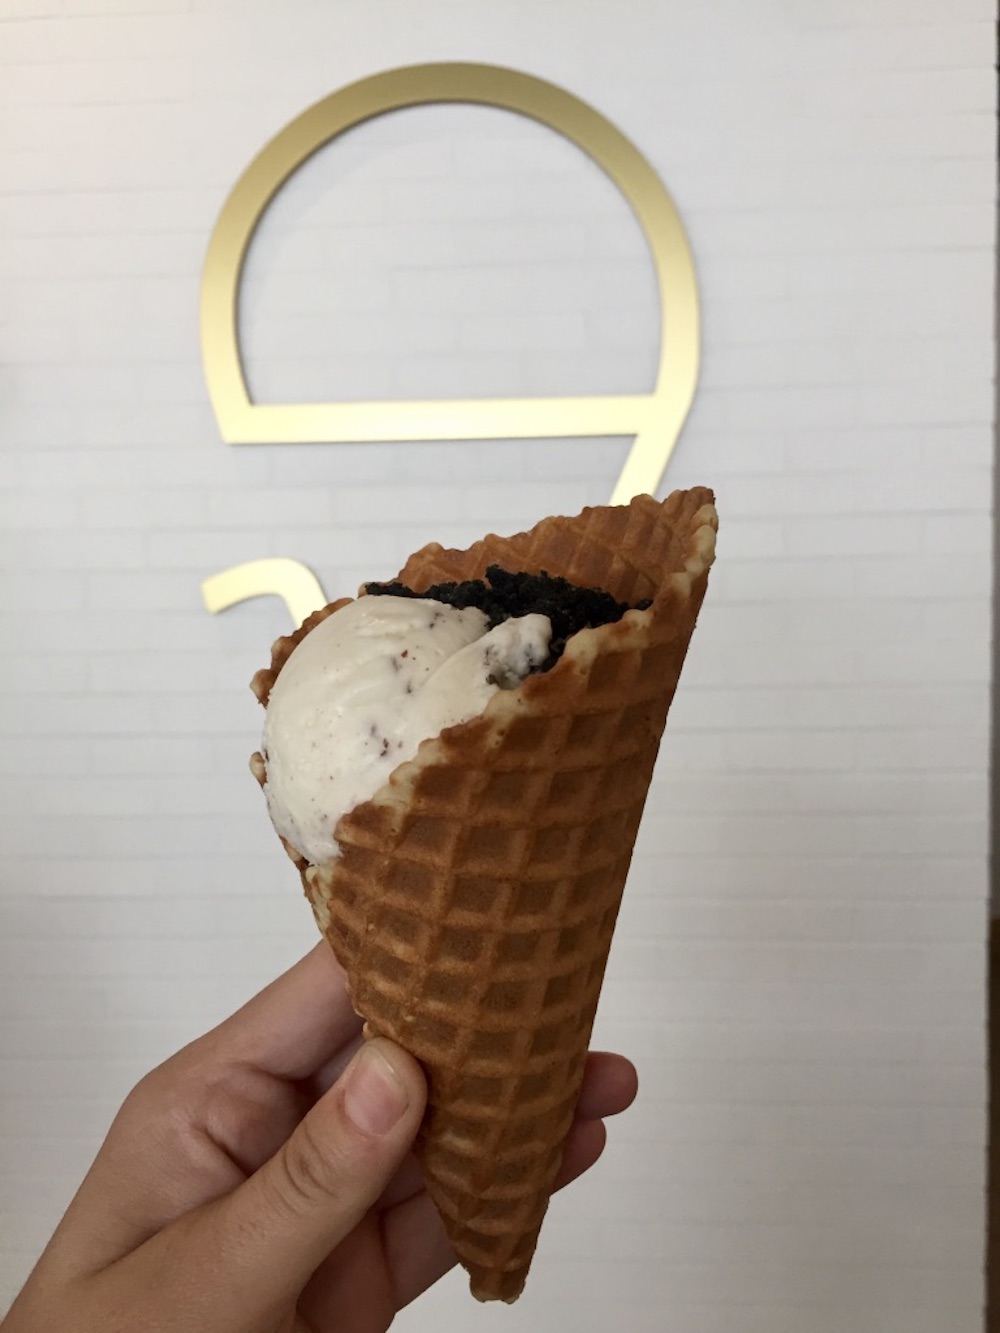 Ice cream cone with edible charcoal at Parlour Ice Cream in Sioux Falls, South Dakota